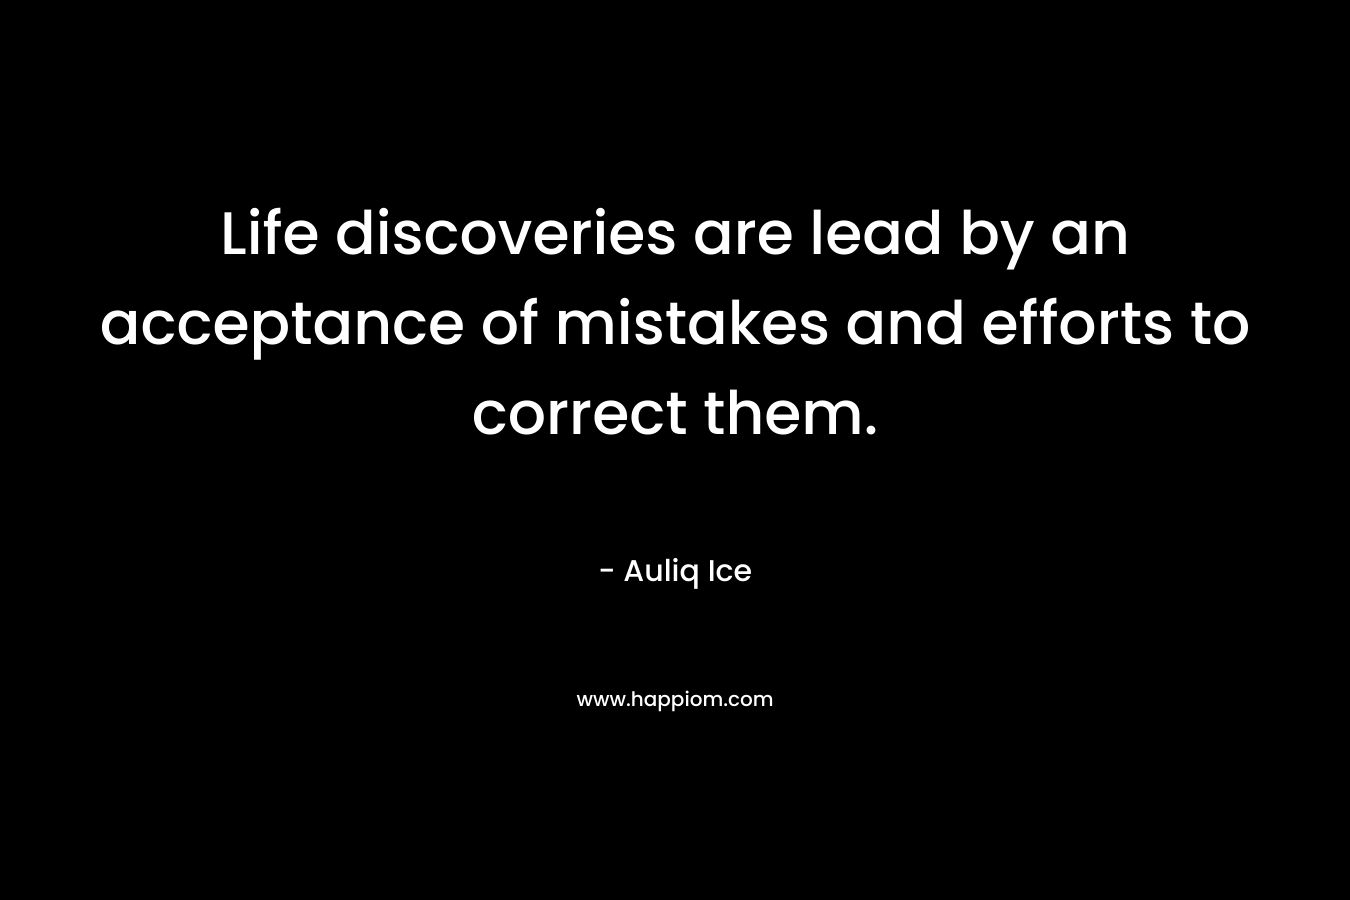 Life discoveries are lead by an acceptance of mistakes and efforts to correct them. – Auliq Ice